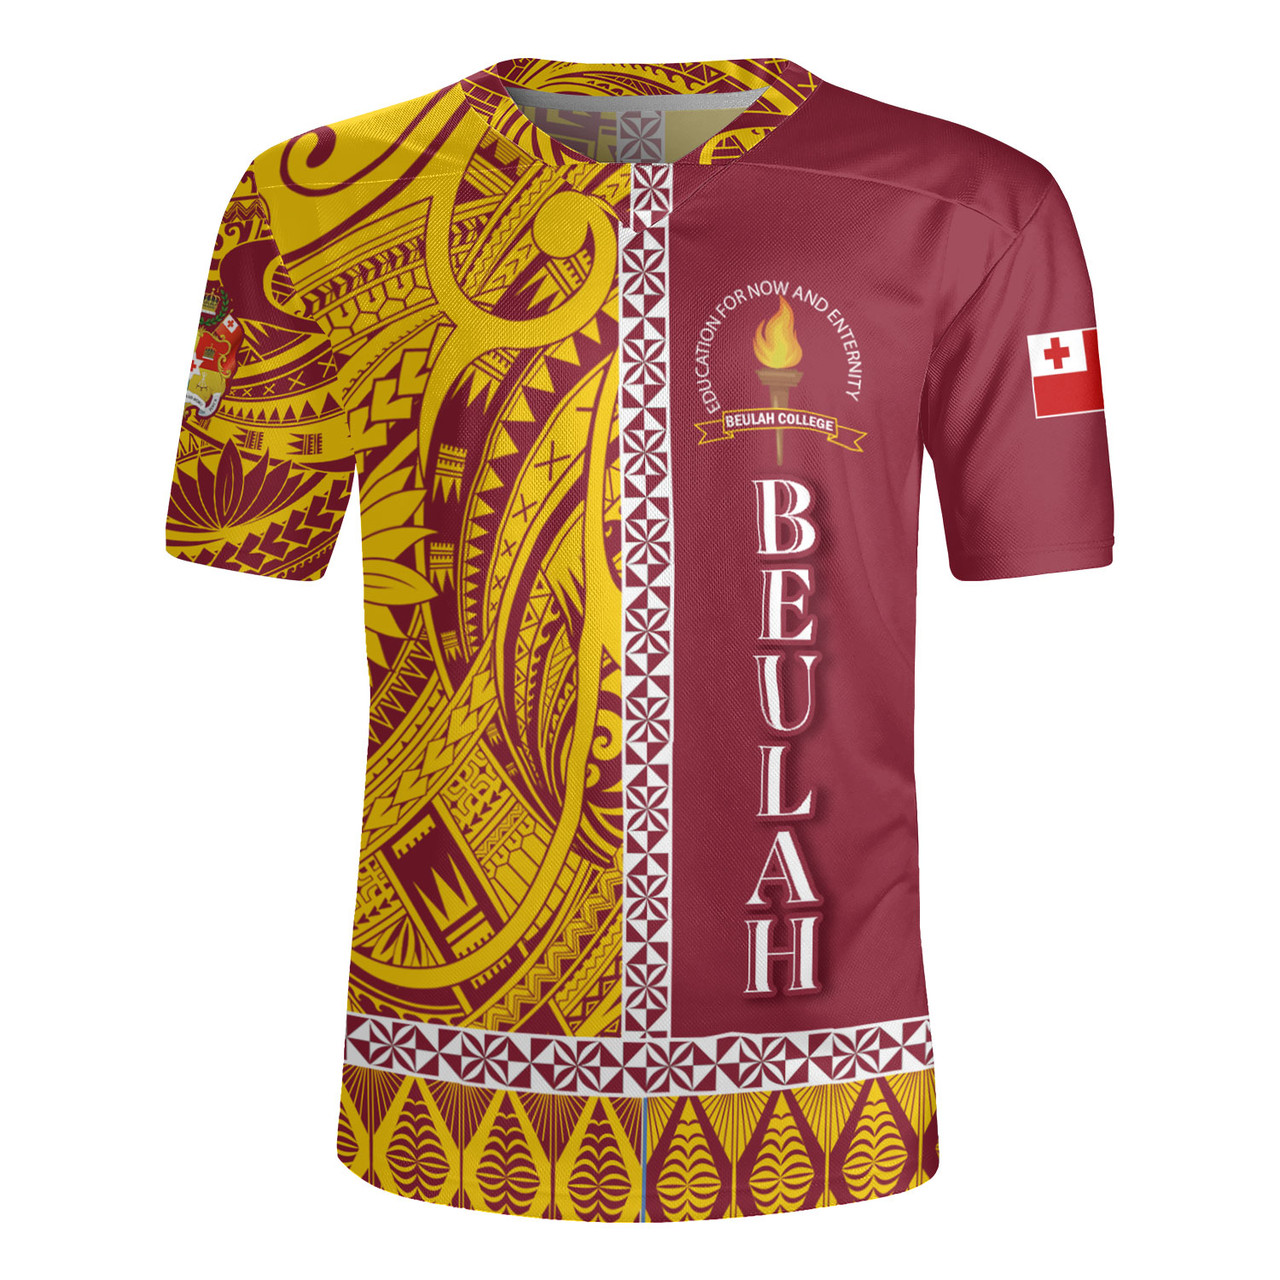 Tonga Custom Personalised Rugby Jersey Beulah College Simple Ngatu Patterns